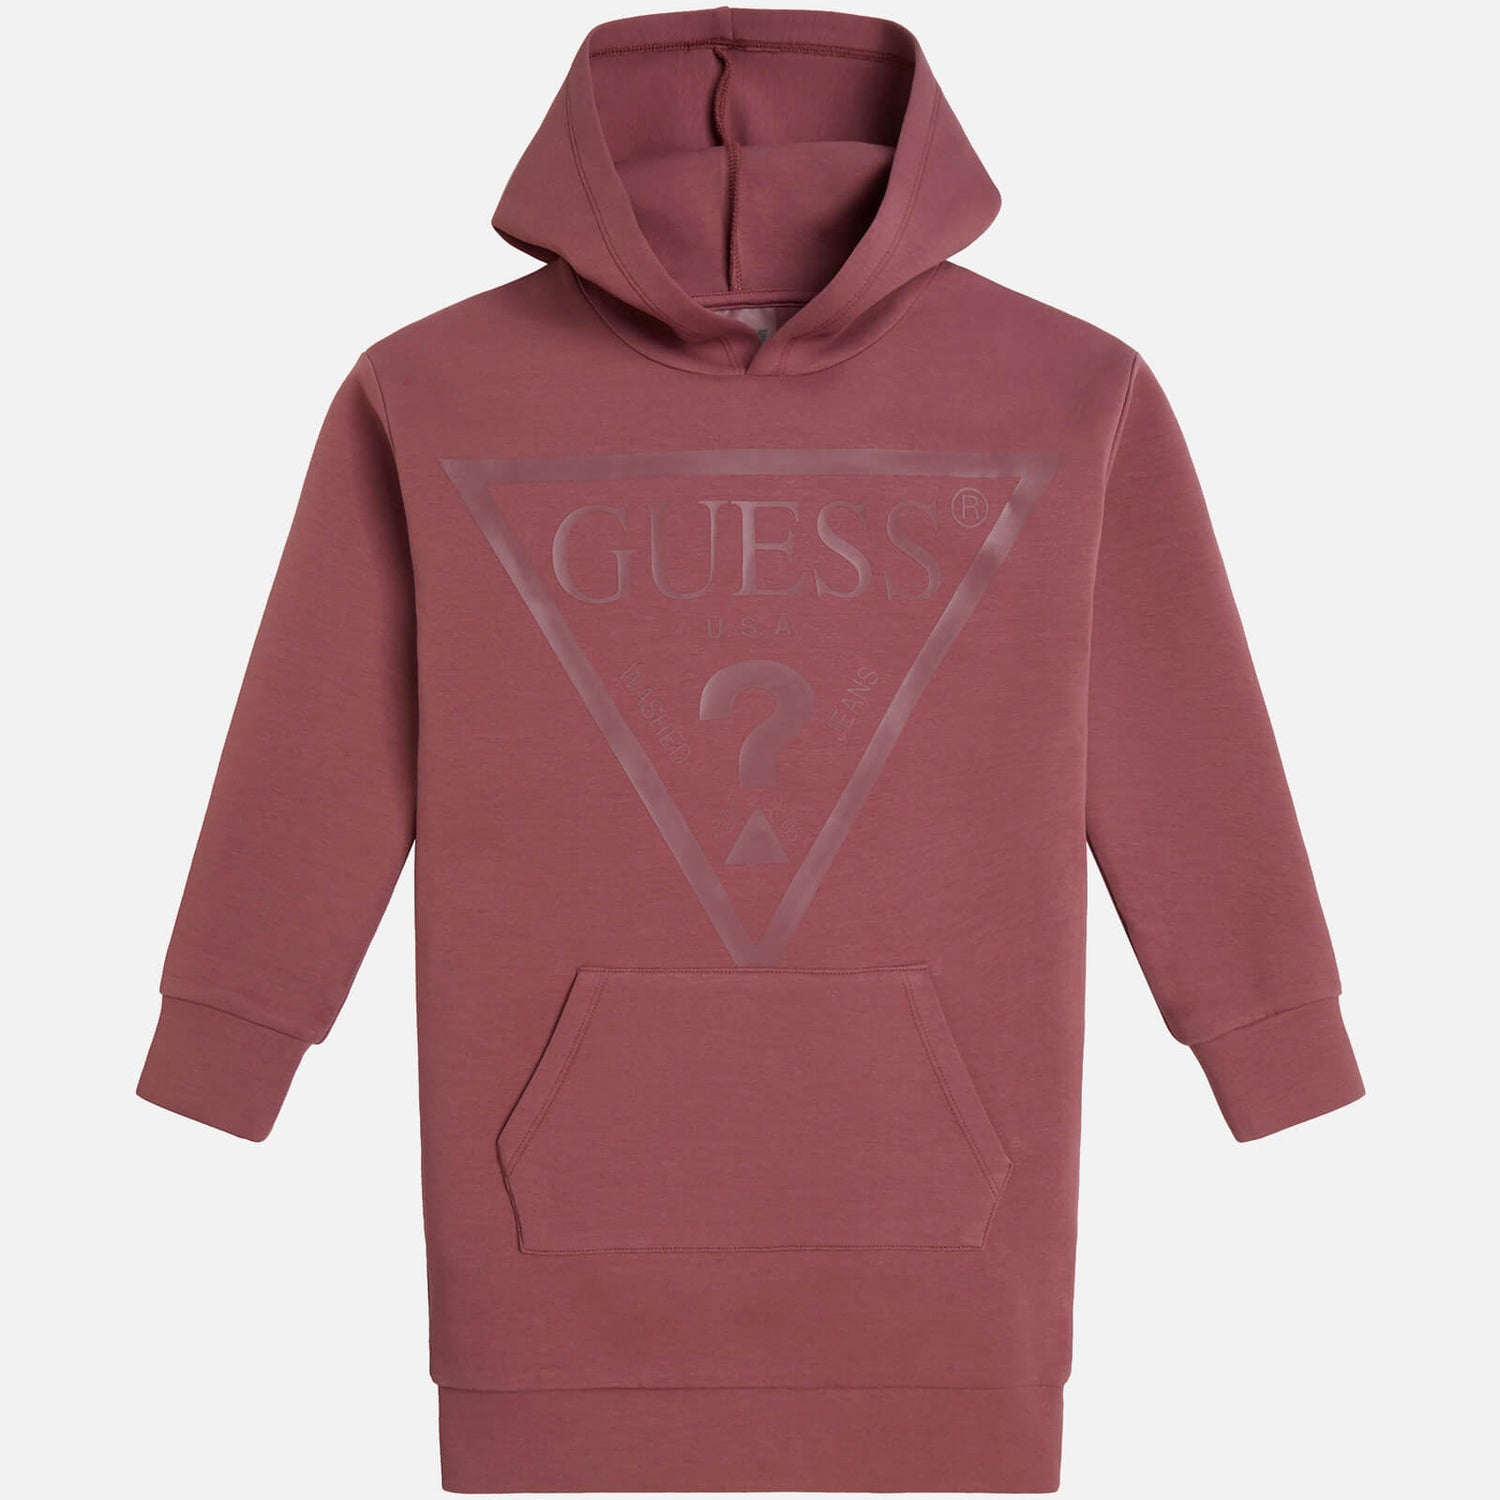 Guess Girls' Logo-Printed Cotton-Blend Hooded Dress - 8 Years